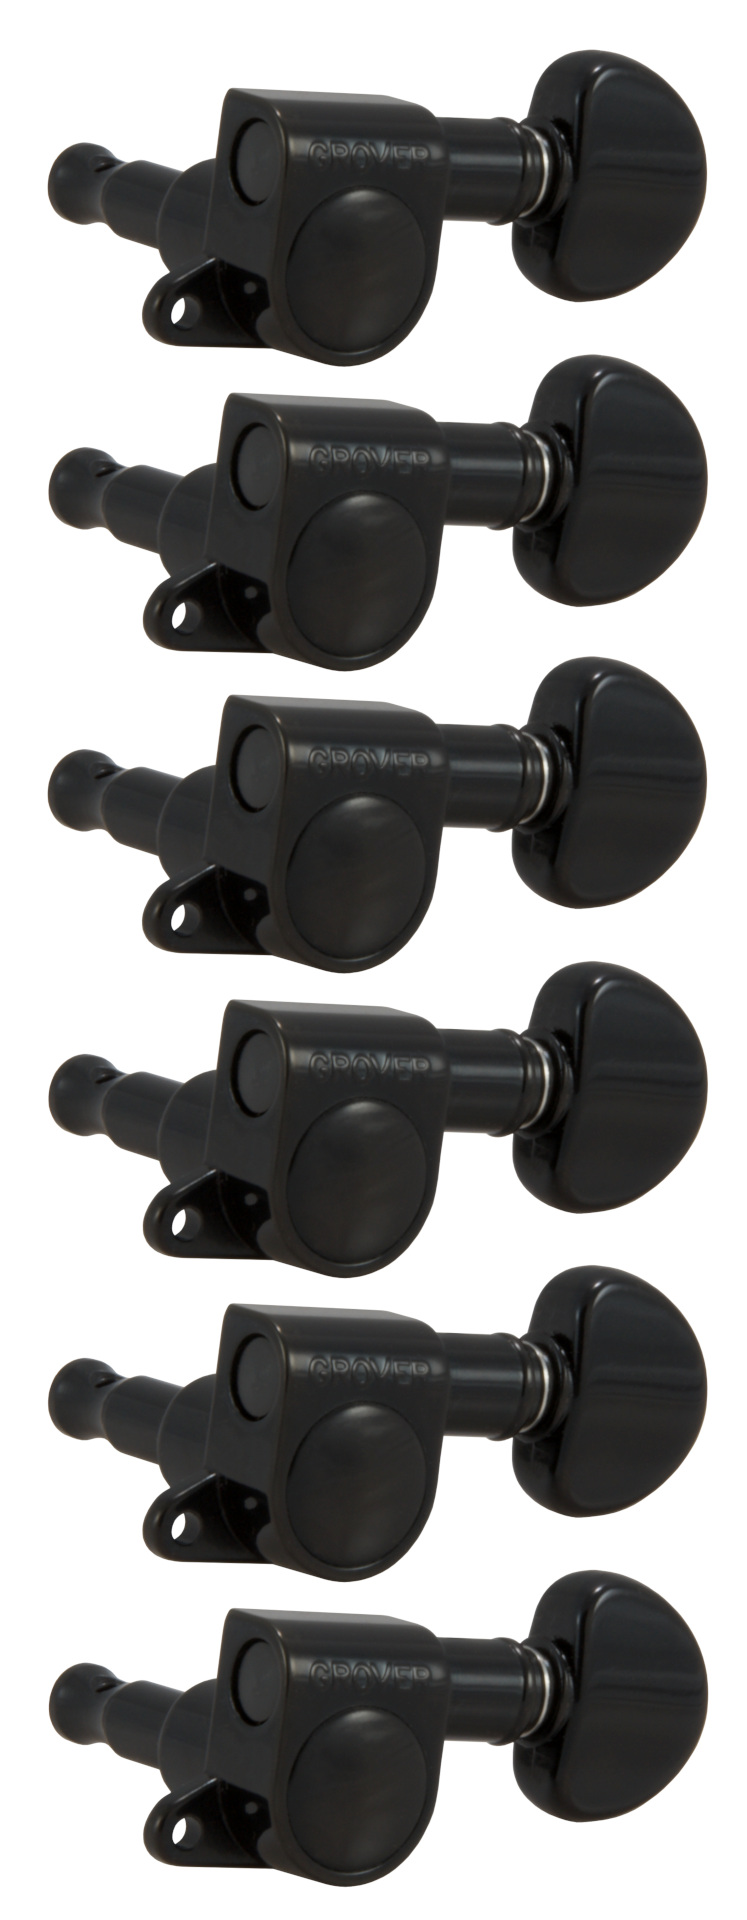 Grover 205BC6 Mini Rotomatics with Round Button - Guitar Machine Heads, 6-in-Line, Bass Side (Left) - Black Chrome